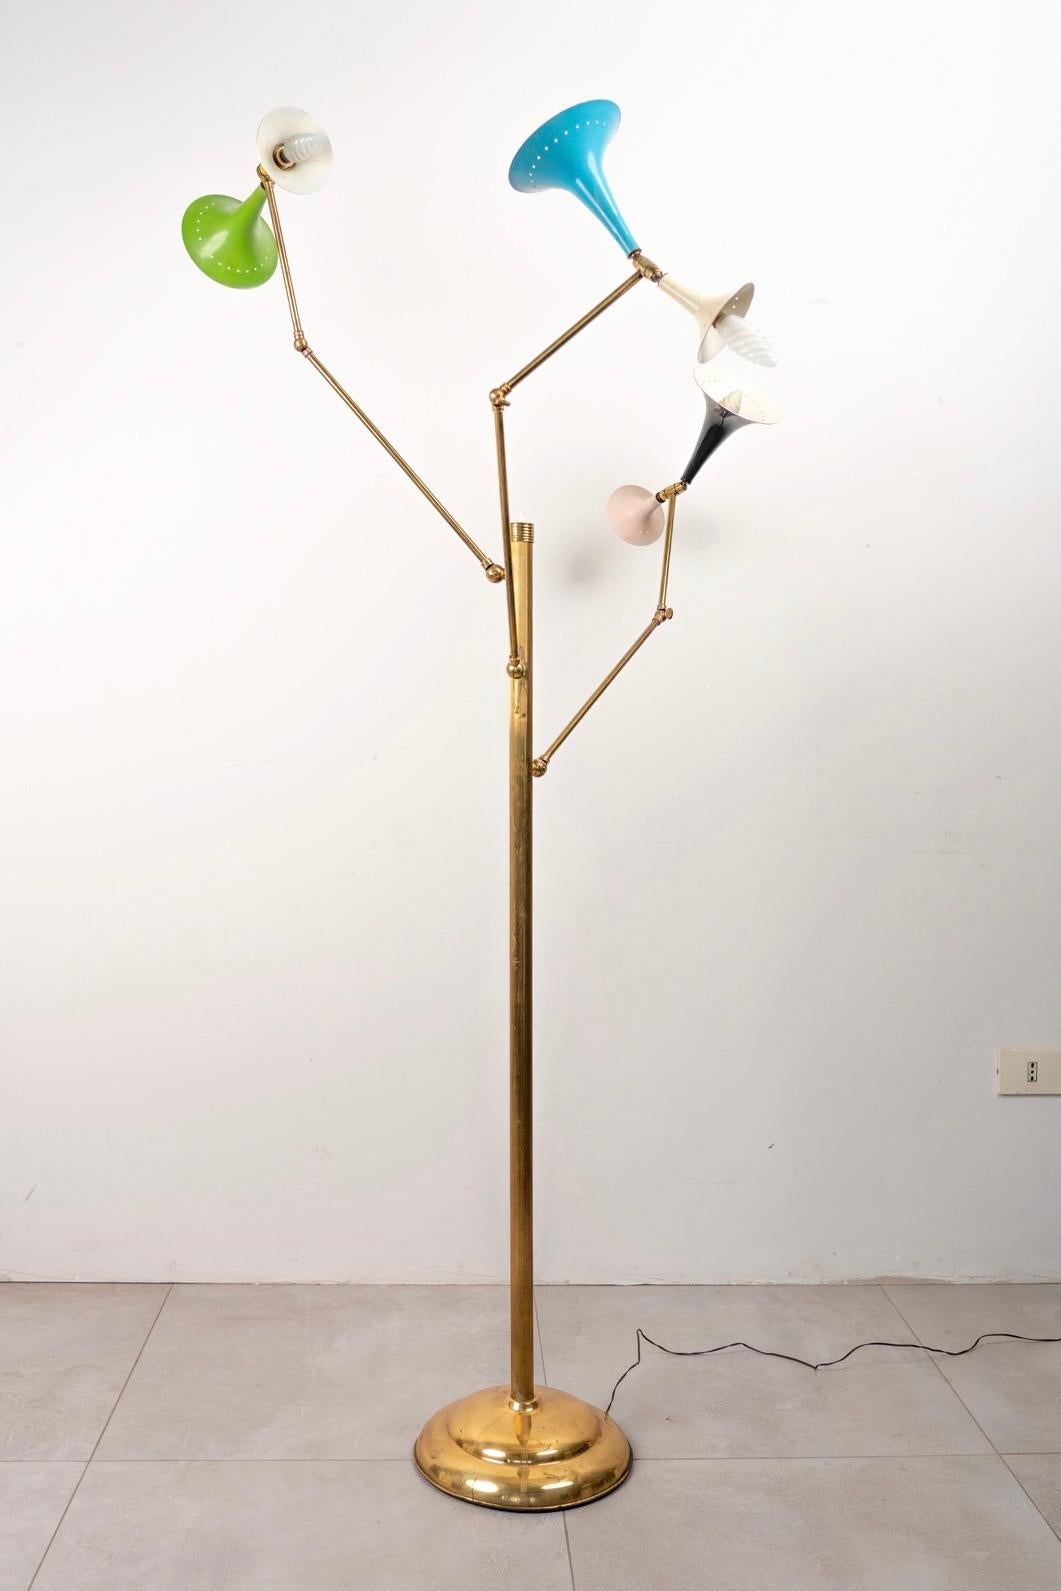 Mid-century three-arm, six-light floor lamp with original paint attributable to Stilnovo.

Made in Italy in the 1950s.

Offered for sale is a very rare Italian Mid-Century Modern three arm floor lamp with the original painted shades, brass pole